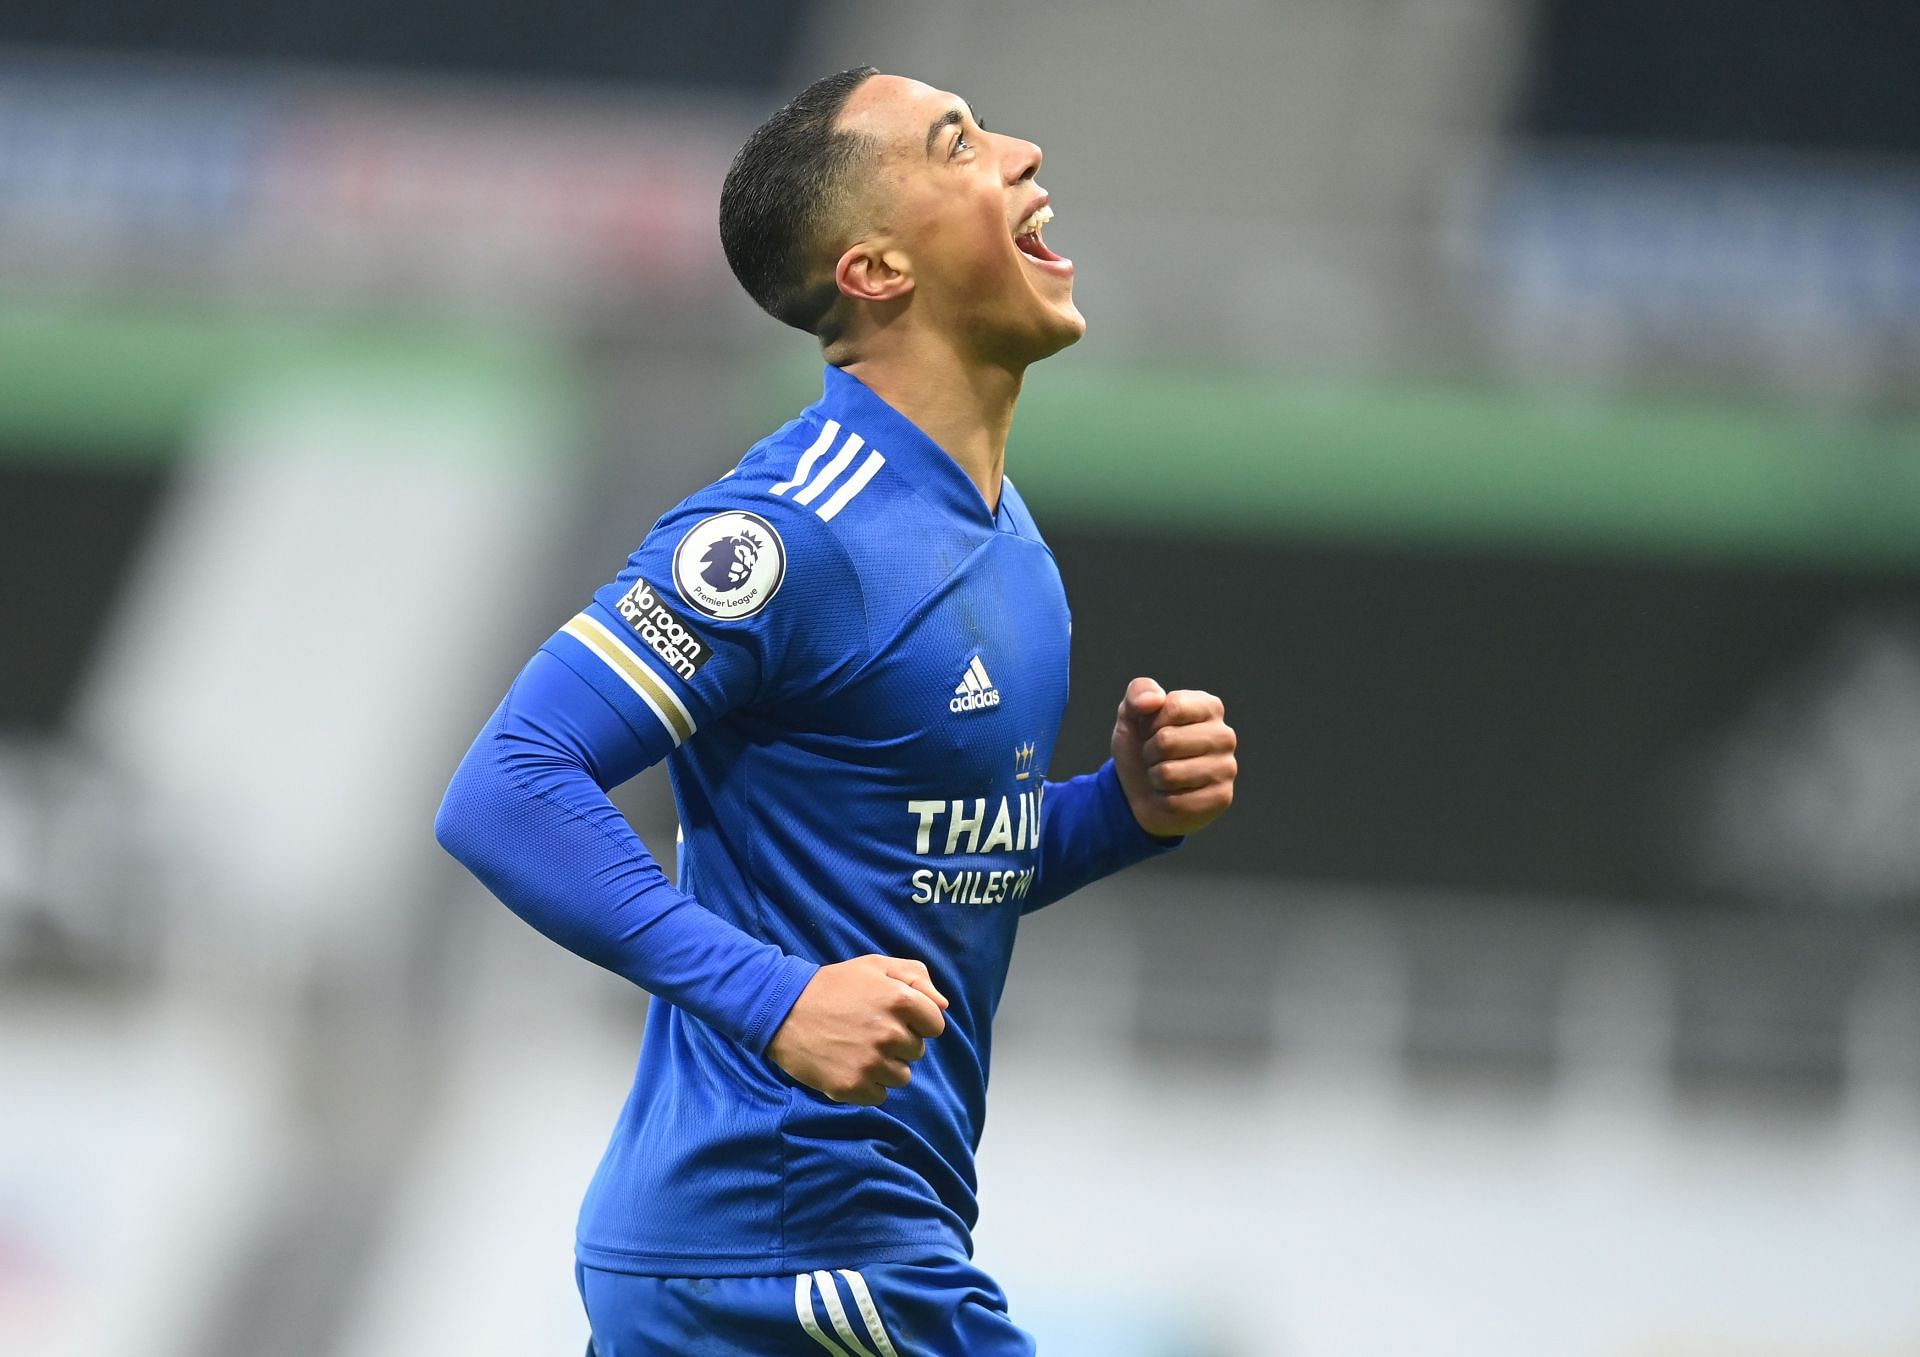 Youri Tielemans is in the final year of his contract at Leicester City